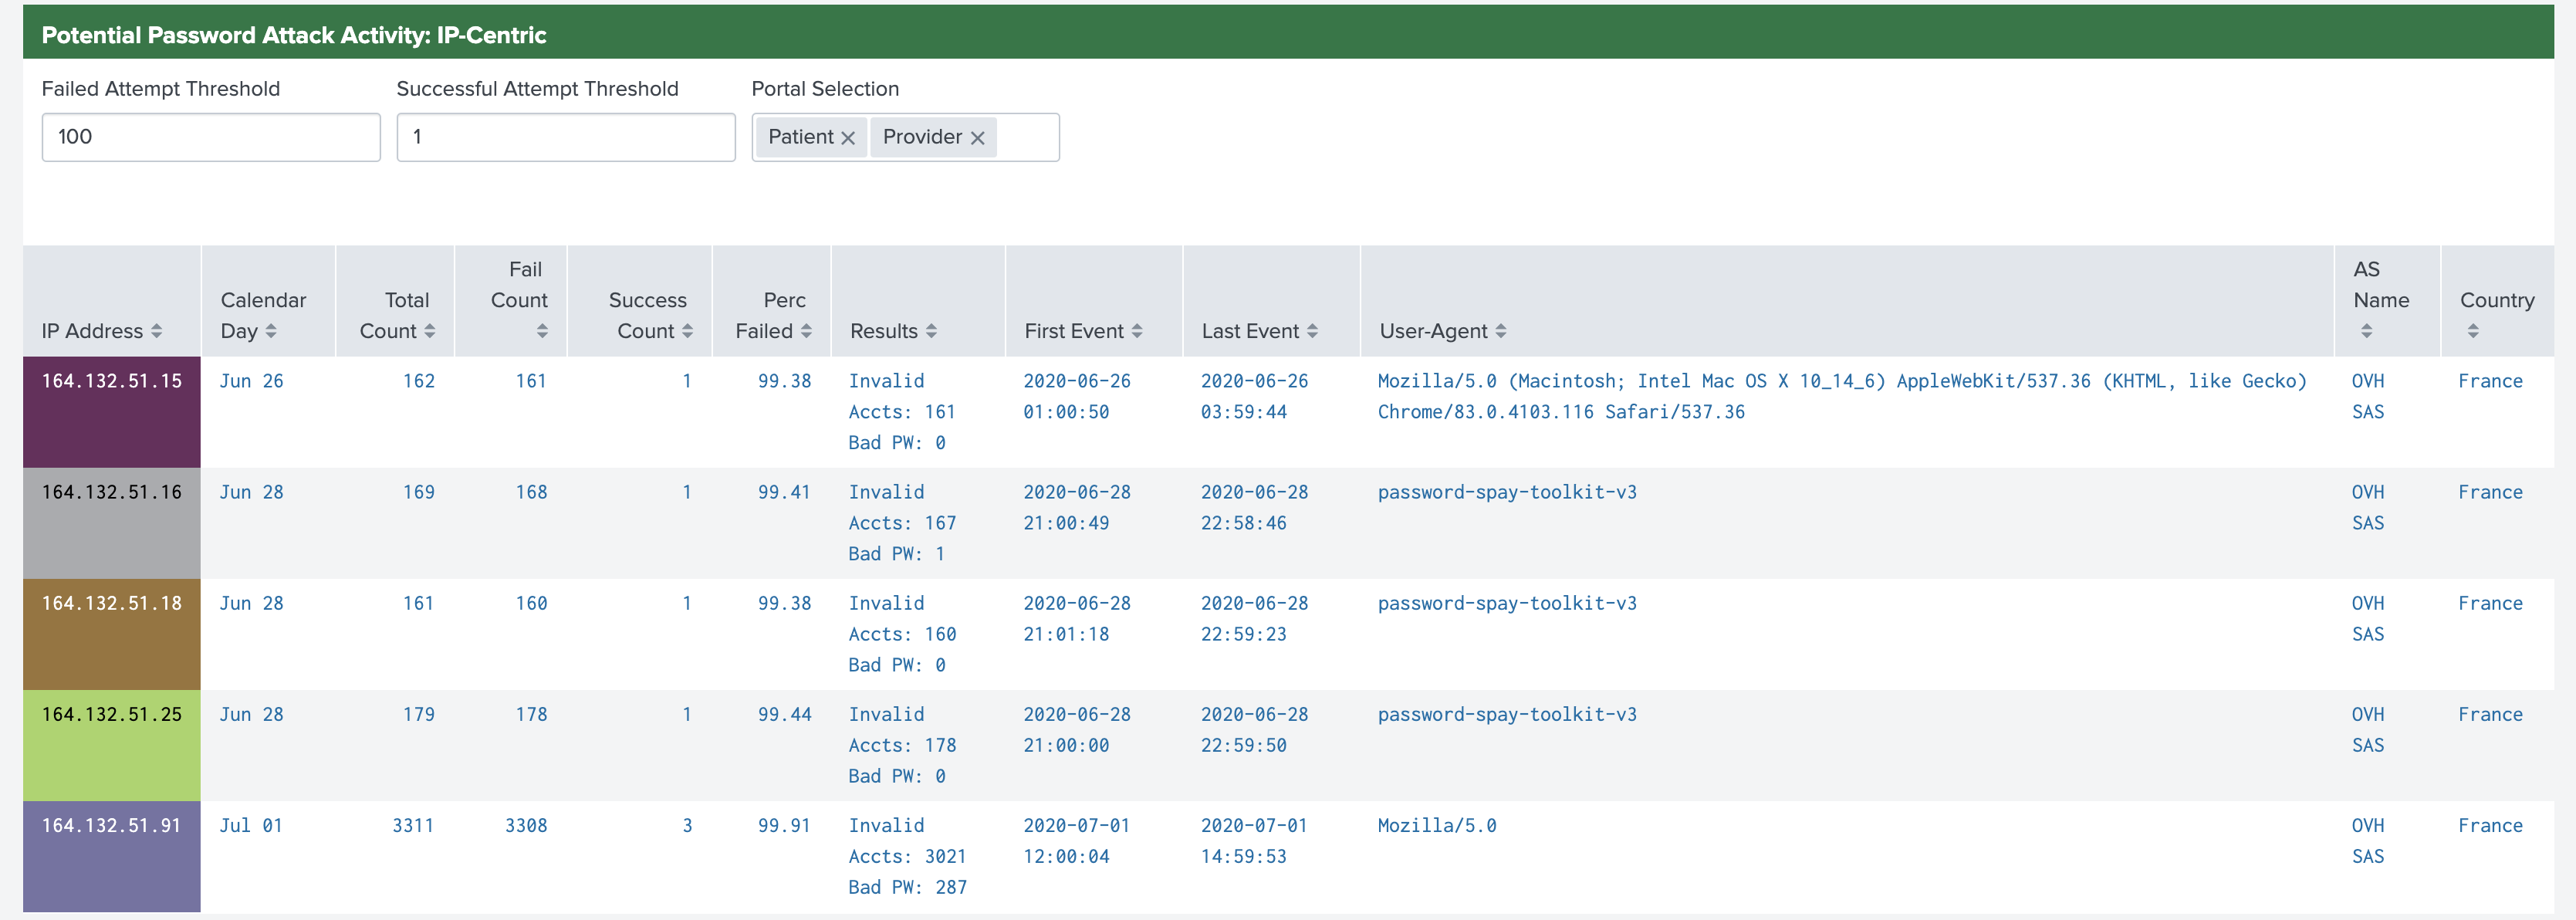 Dashboard panel showing potential password attack events